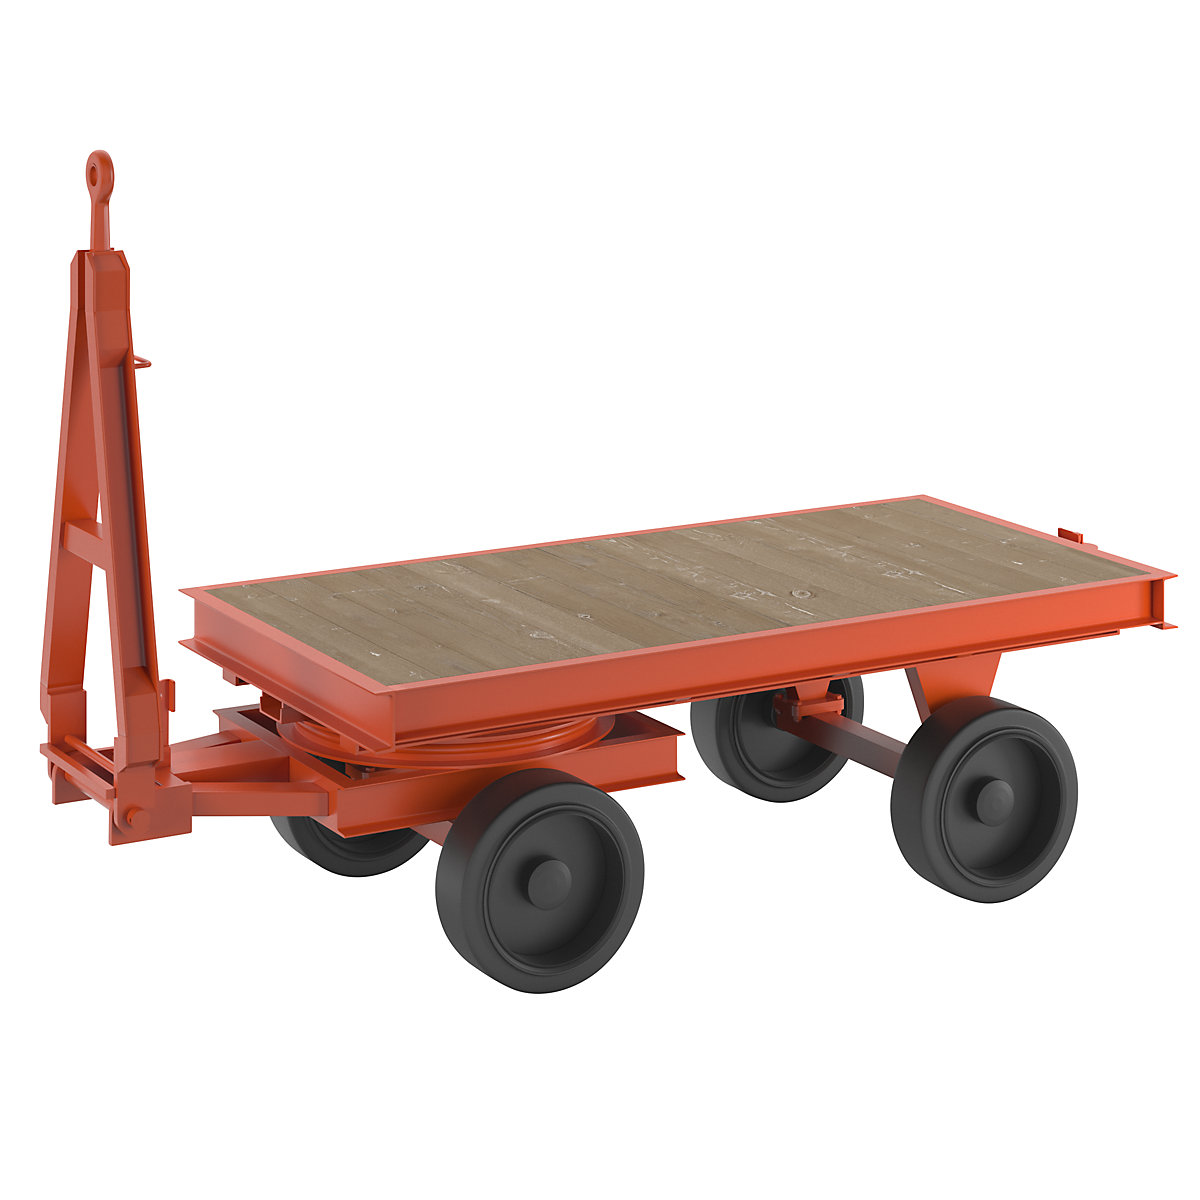 Trailer, 2-wheel turntable steering, max. load 8 t, platform 2.0 x 1.0 m, solid rubber tyres-3